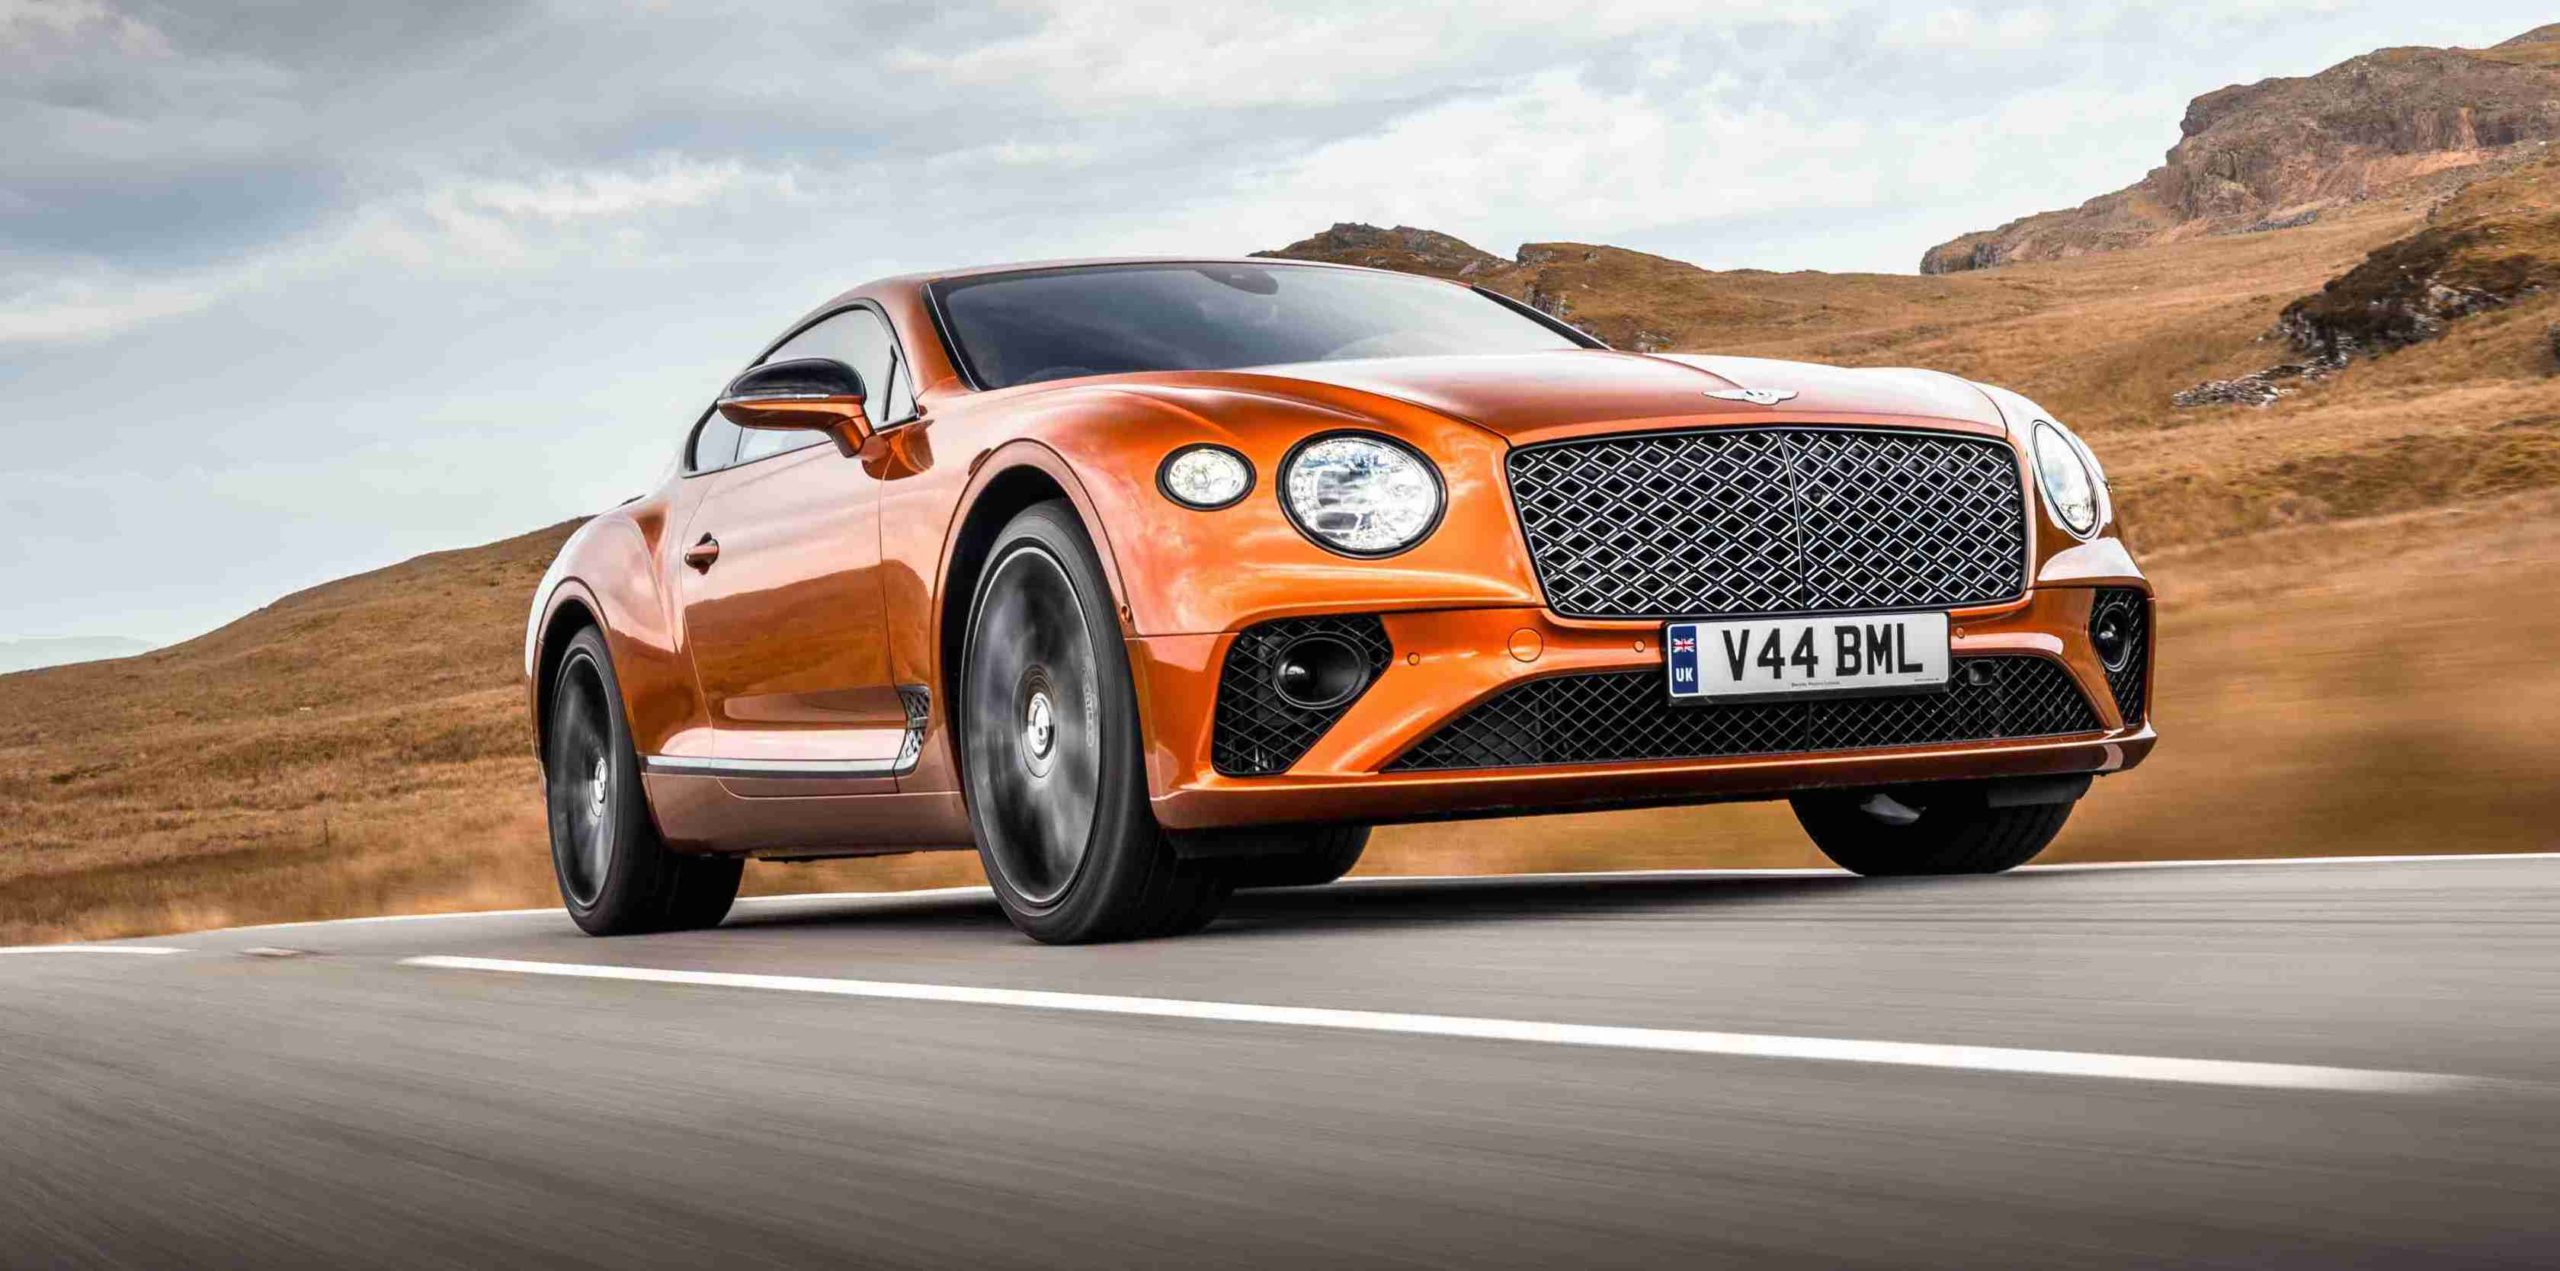 Bentley unveils the swiftest, most dynamic and most luxurious continental GT yet created